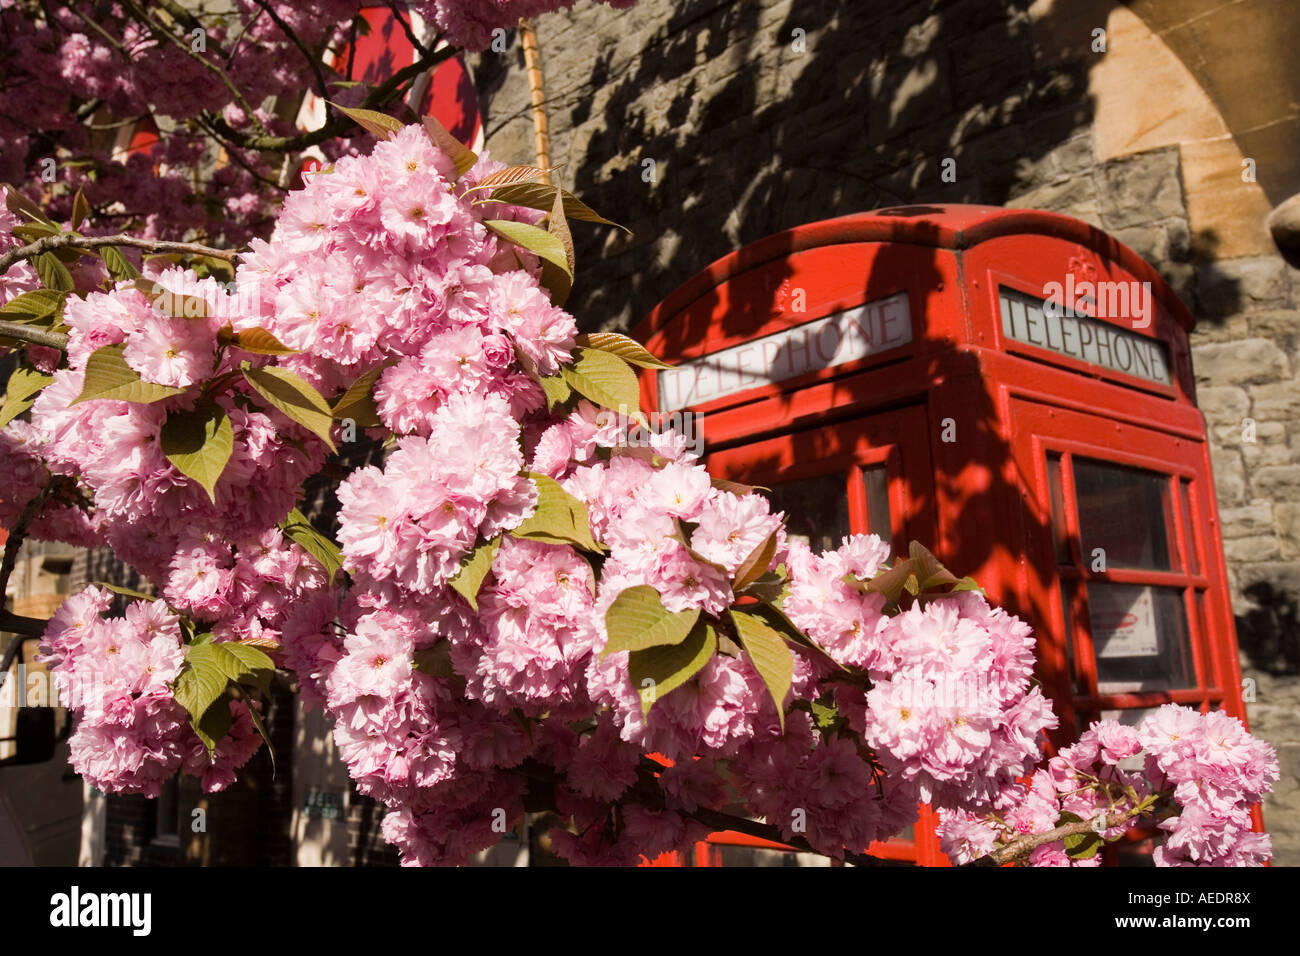 UK Wales Powys Builth Wells Castle Street flowering cherry tree in blossom near K6 phone box Stock Photo